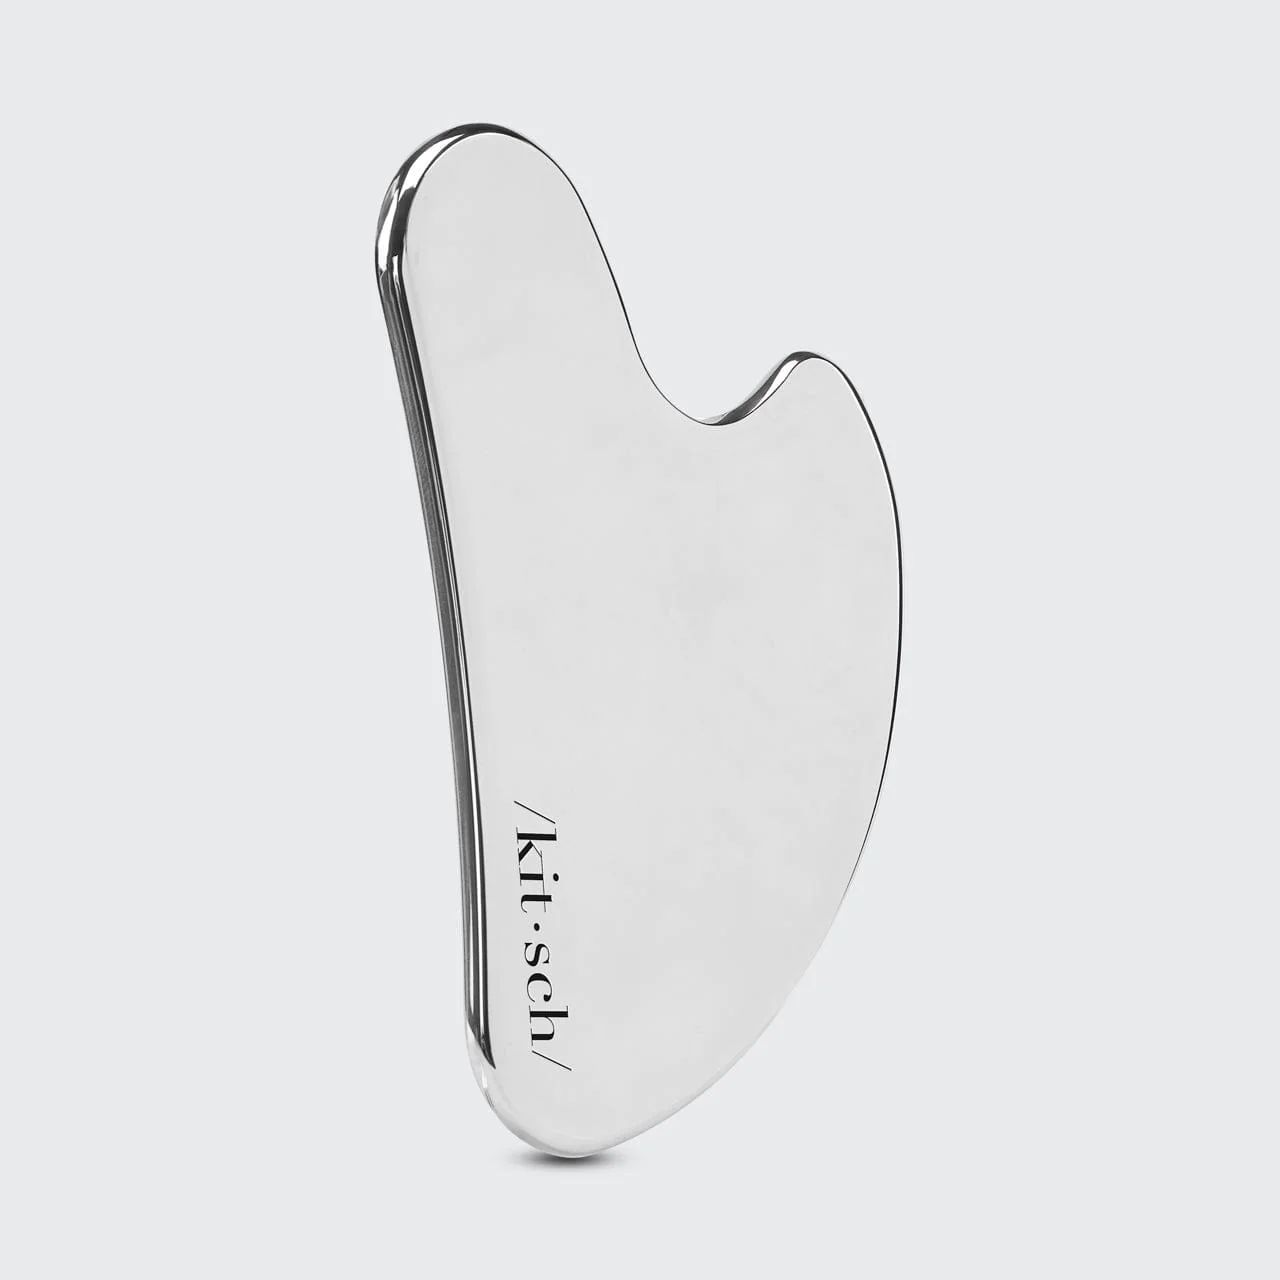 Get Your Stainless Steel Gua Sha Today - Free Shipping on Orders $35+ | Kitsch